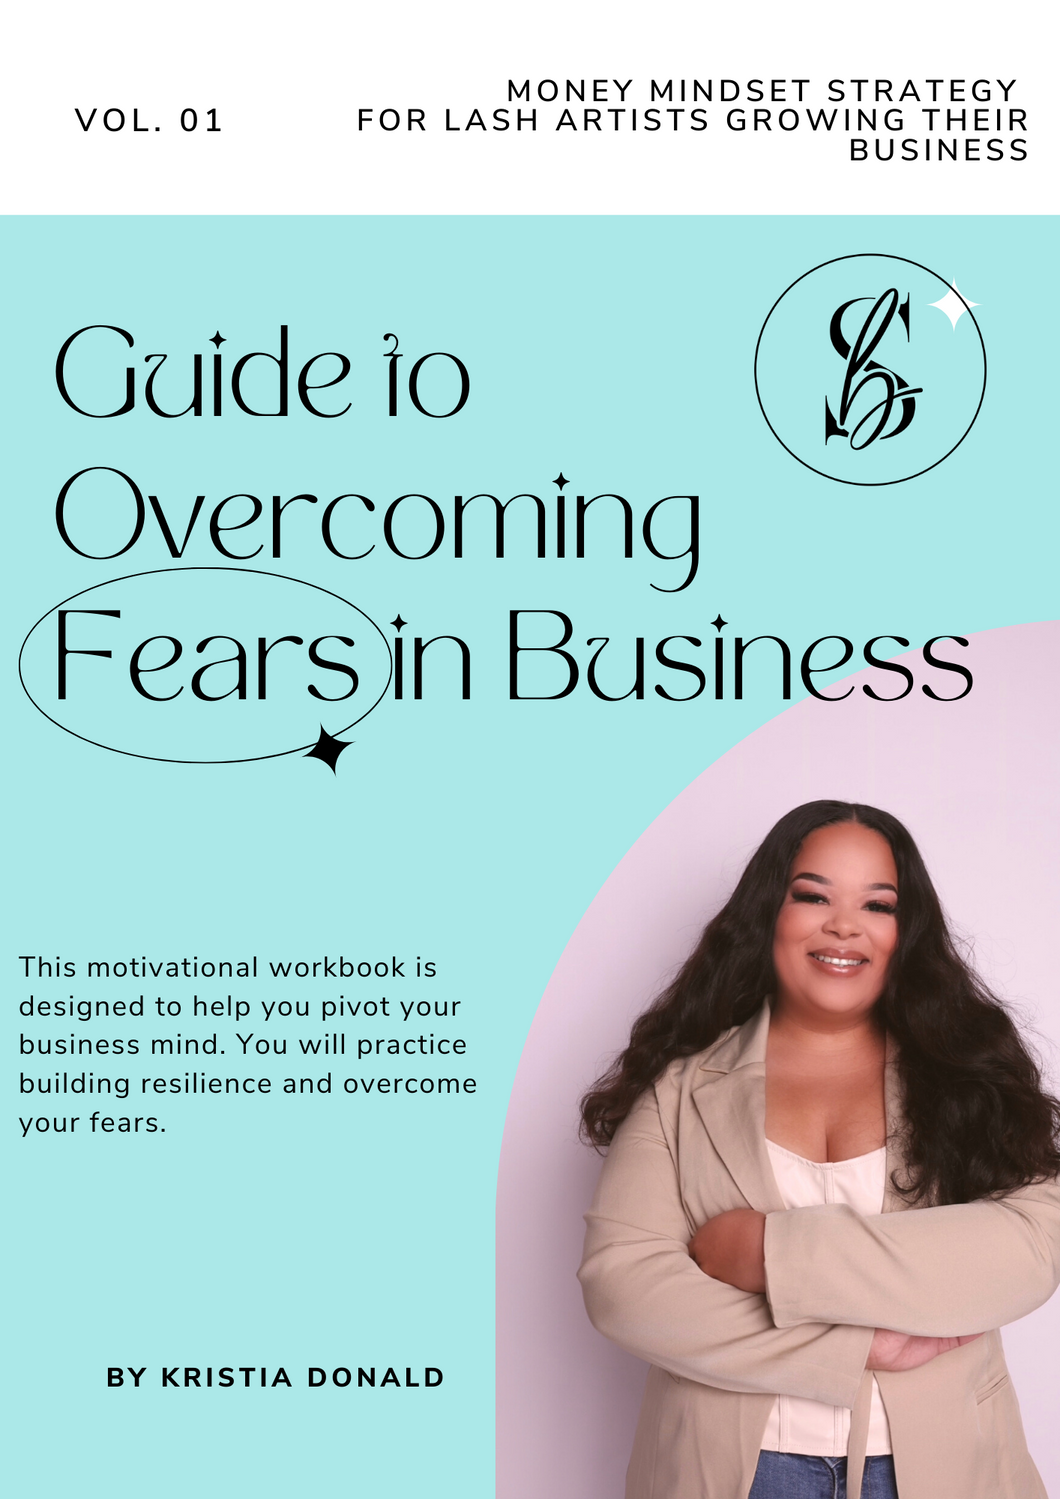 Guide to Overcoming Fear in Your Lash Business